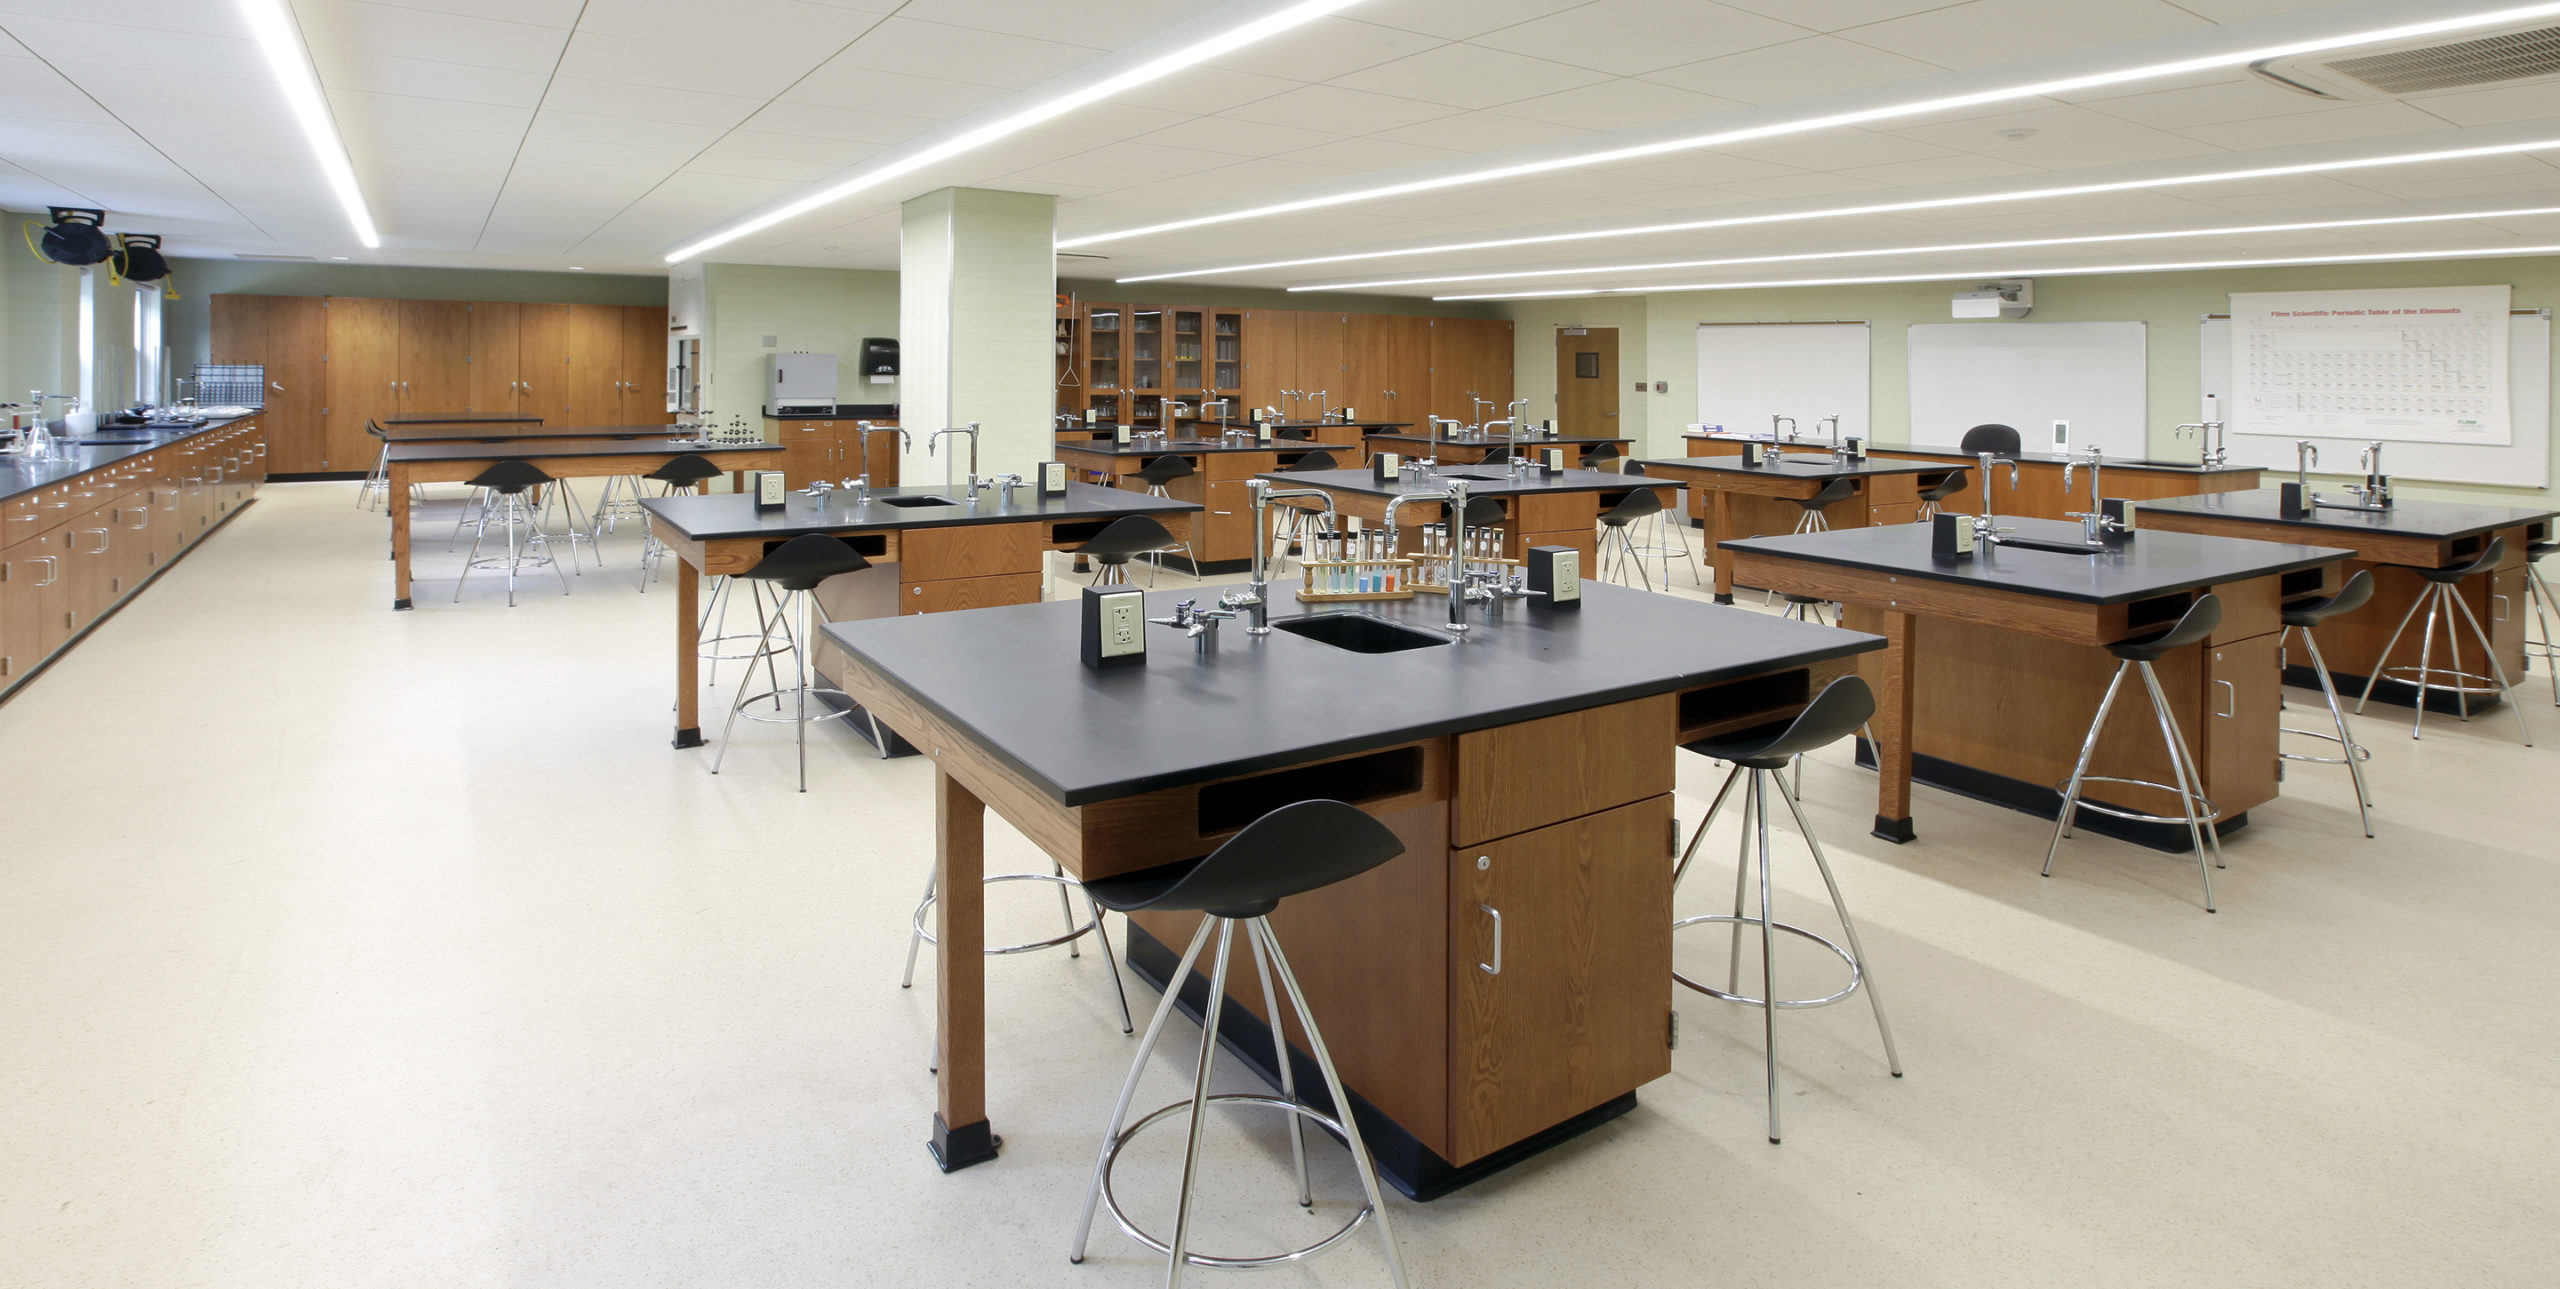 Chemistry lab with two stools at each lab table at Saint Anthony's High School